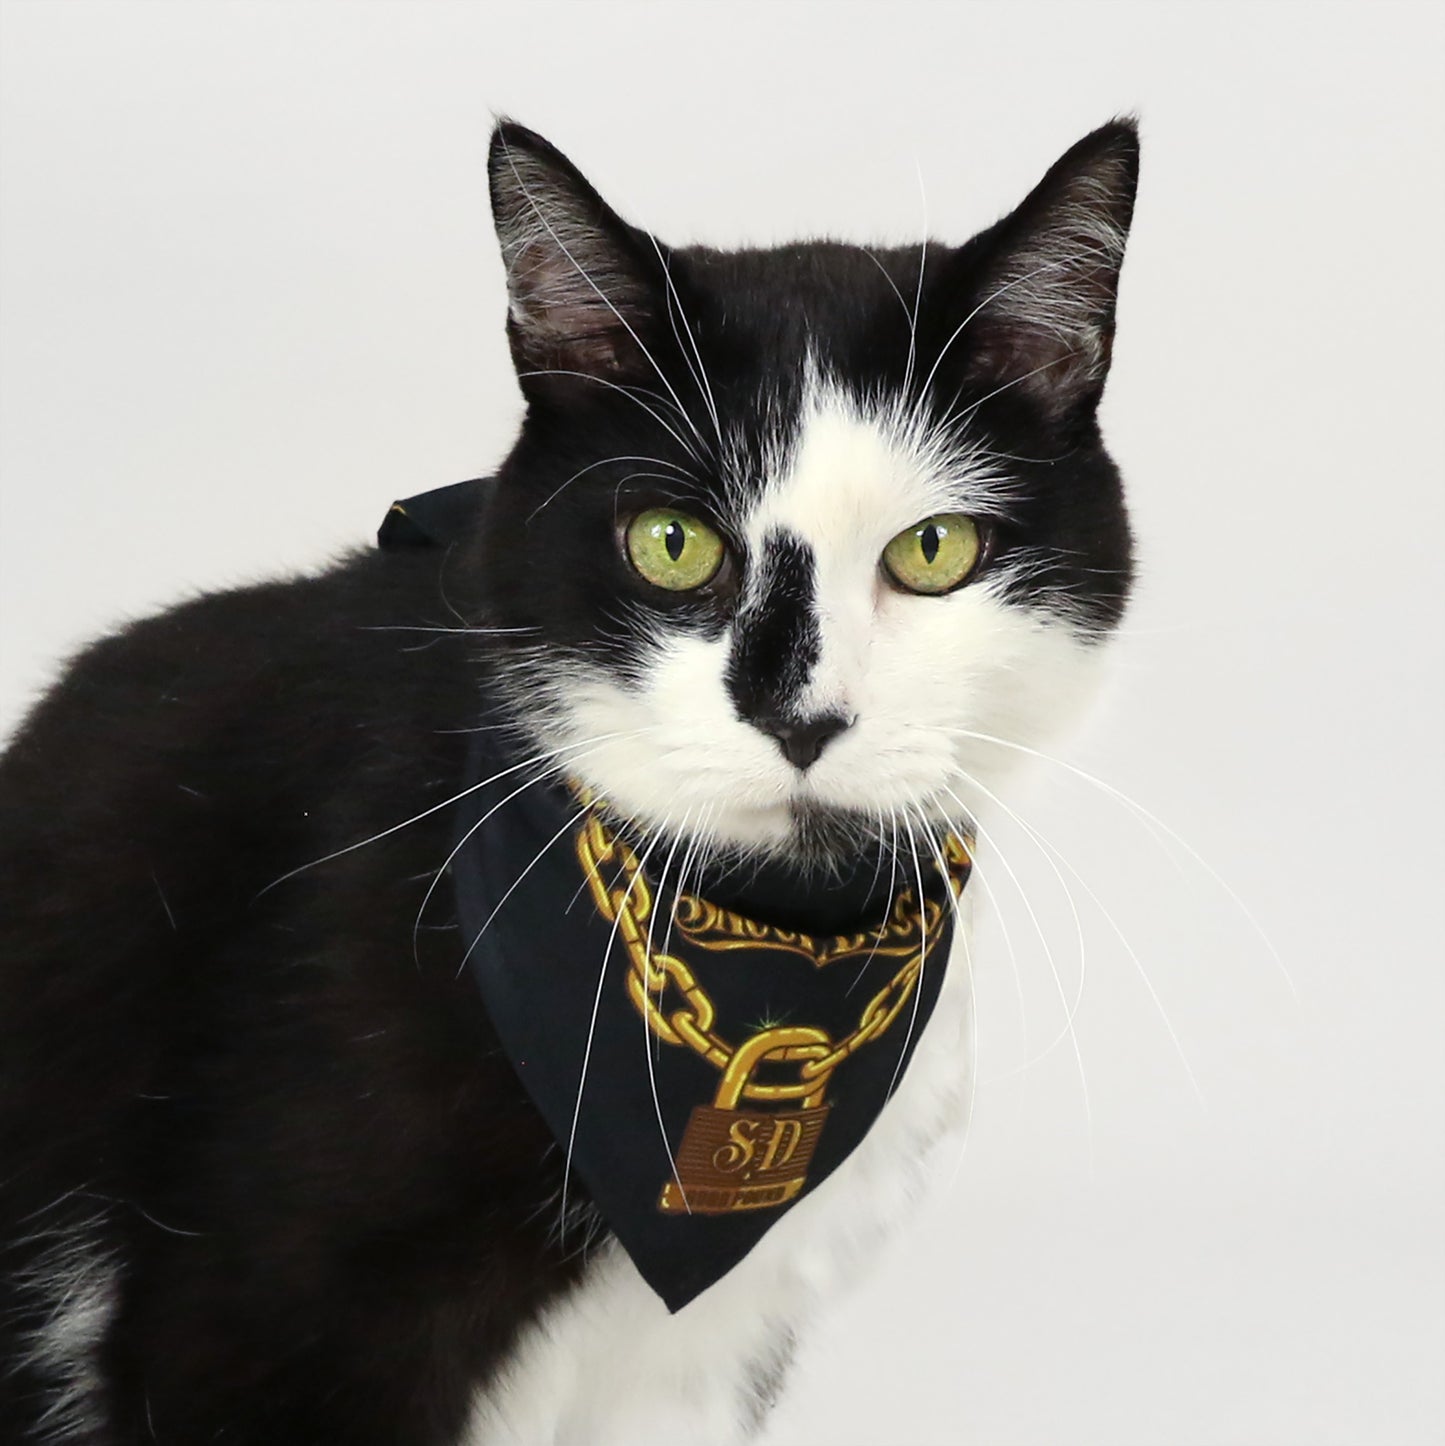 Bottlecat the Black and White Cat wearing the Off the Chain Deluxe Pet Bandana in size Small.